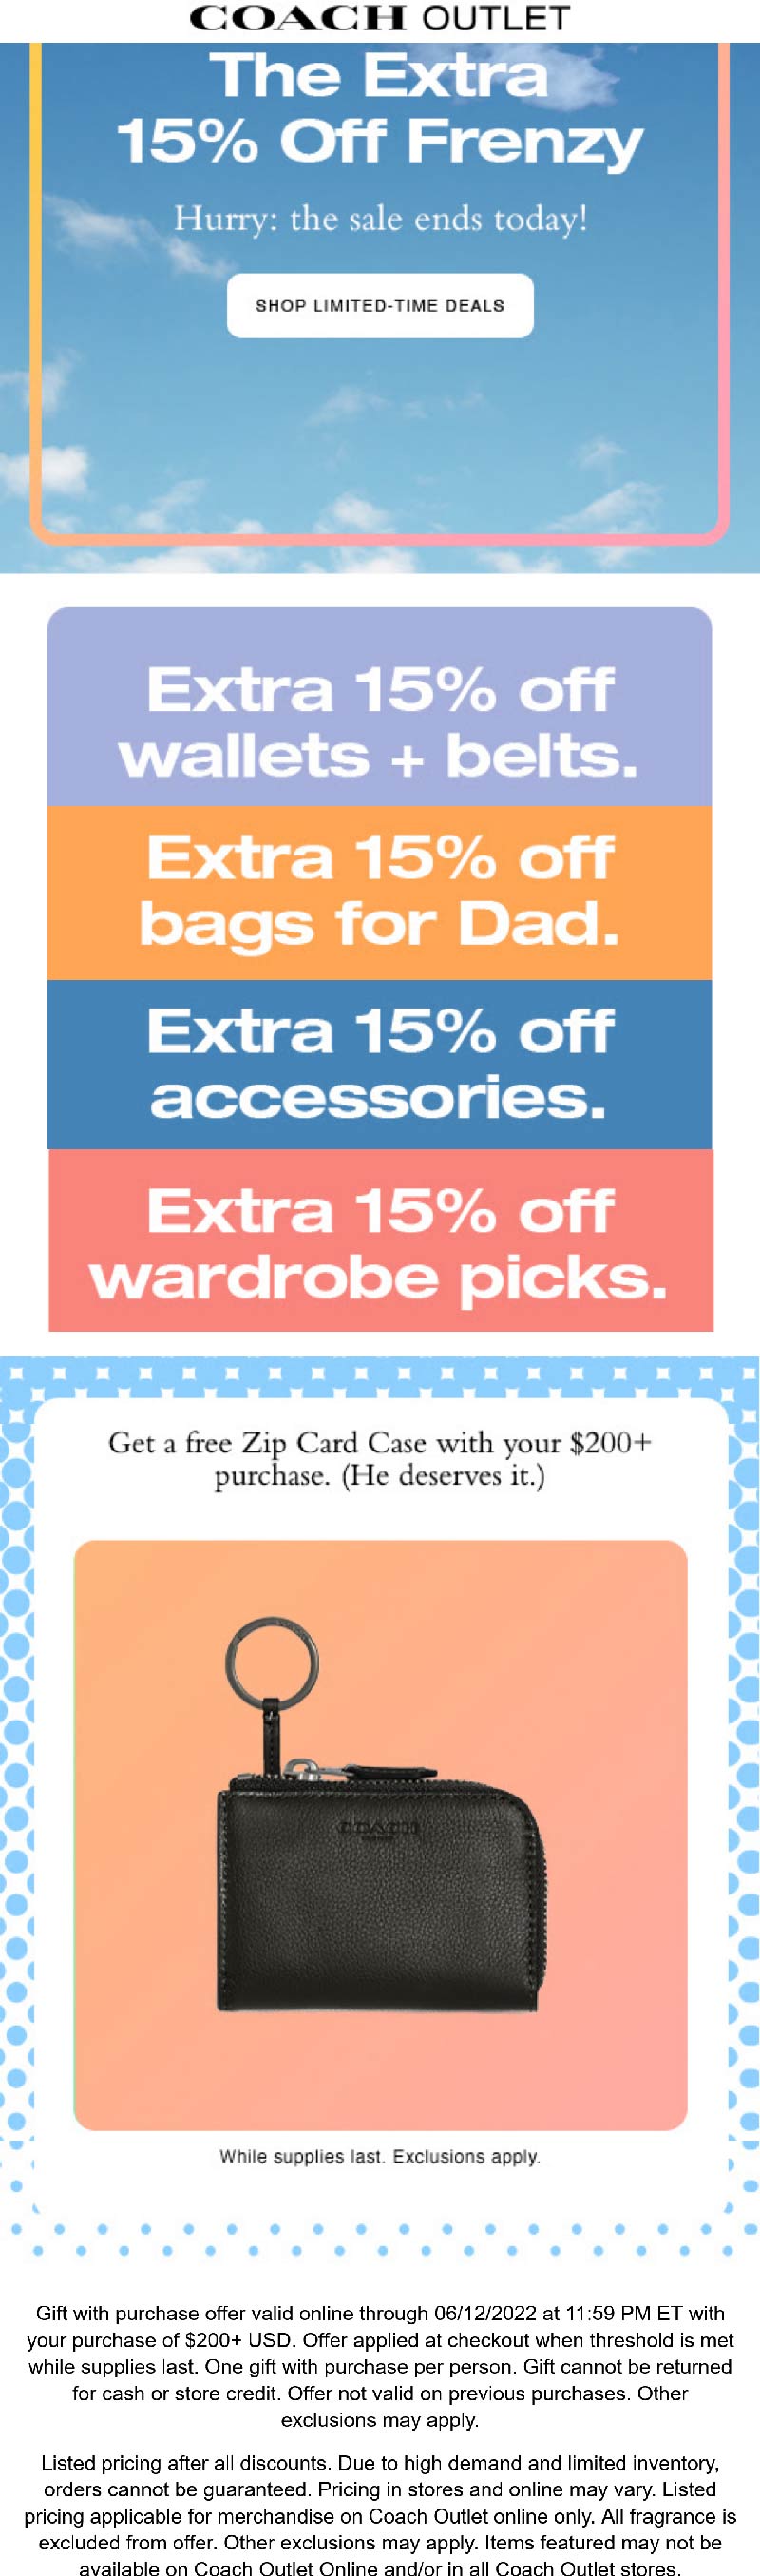 Coach Outlet stores Coupon  Extra 15% off + free zip card case on $200 today at Coach Outlet #coachoutlet 